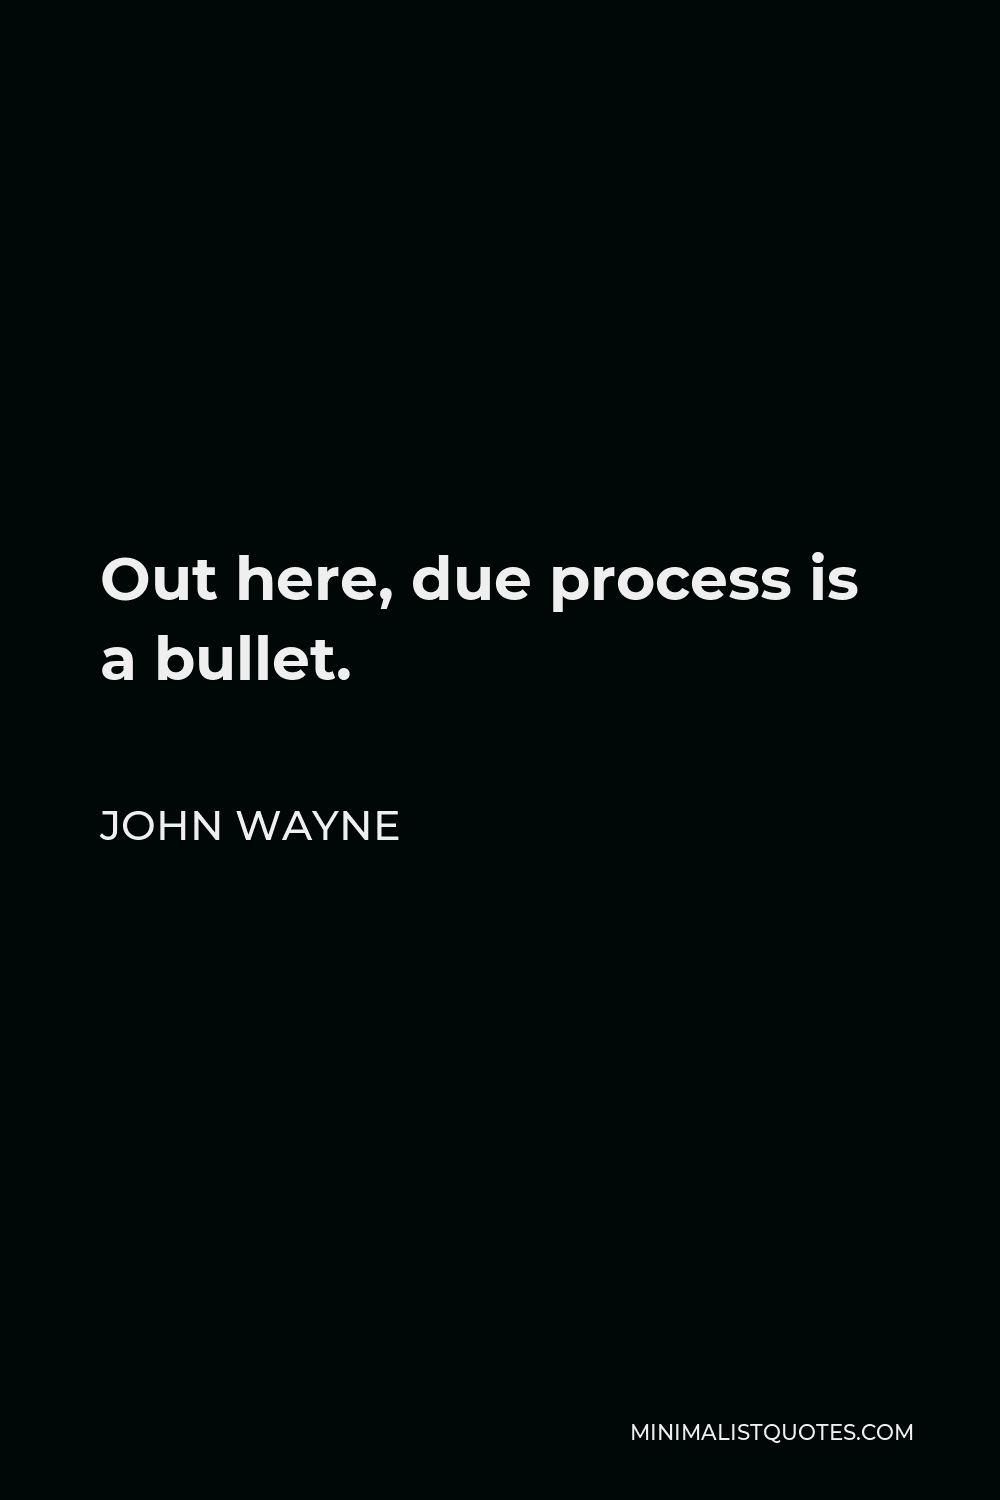 John Wayne Quote - Out here, due process is a bullet.